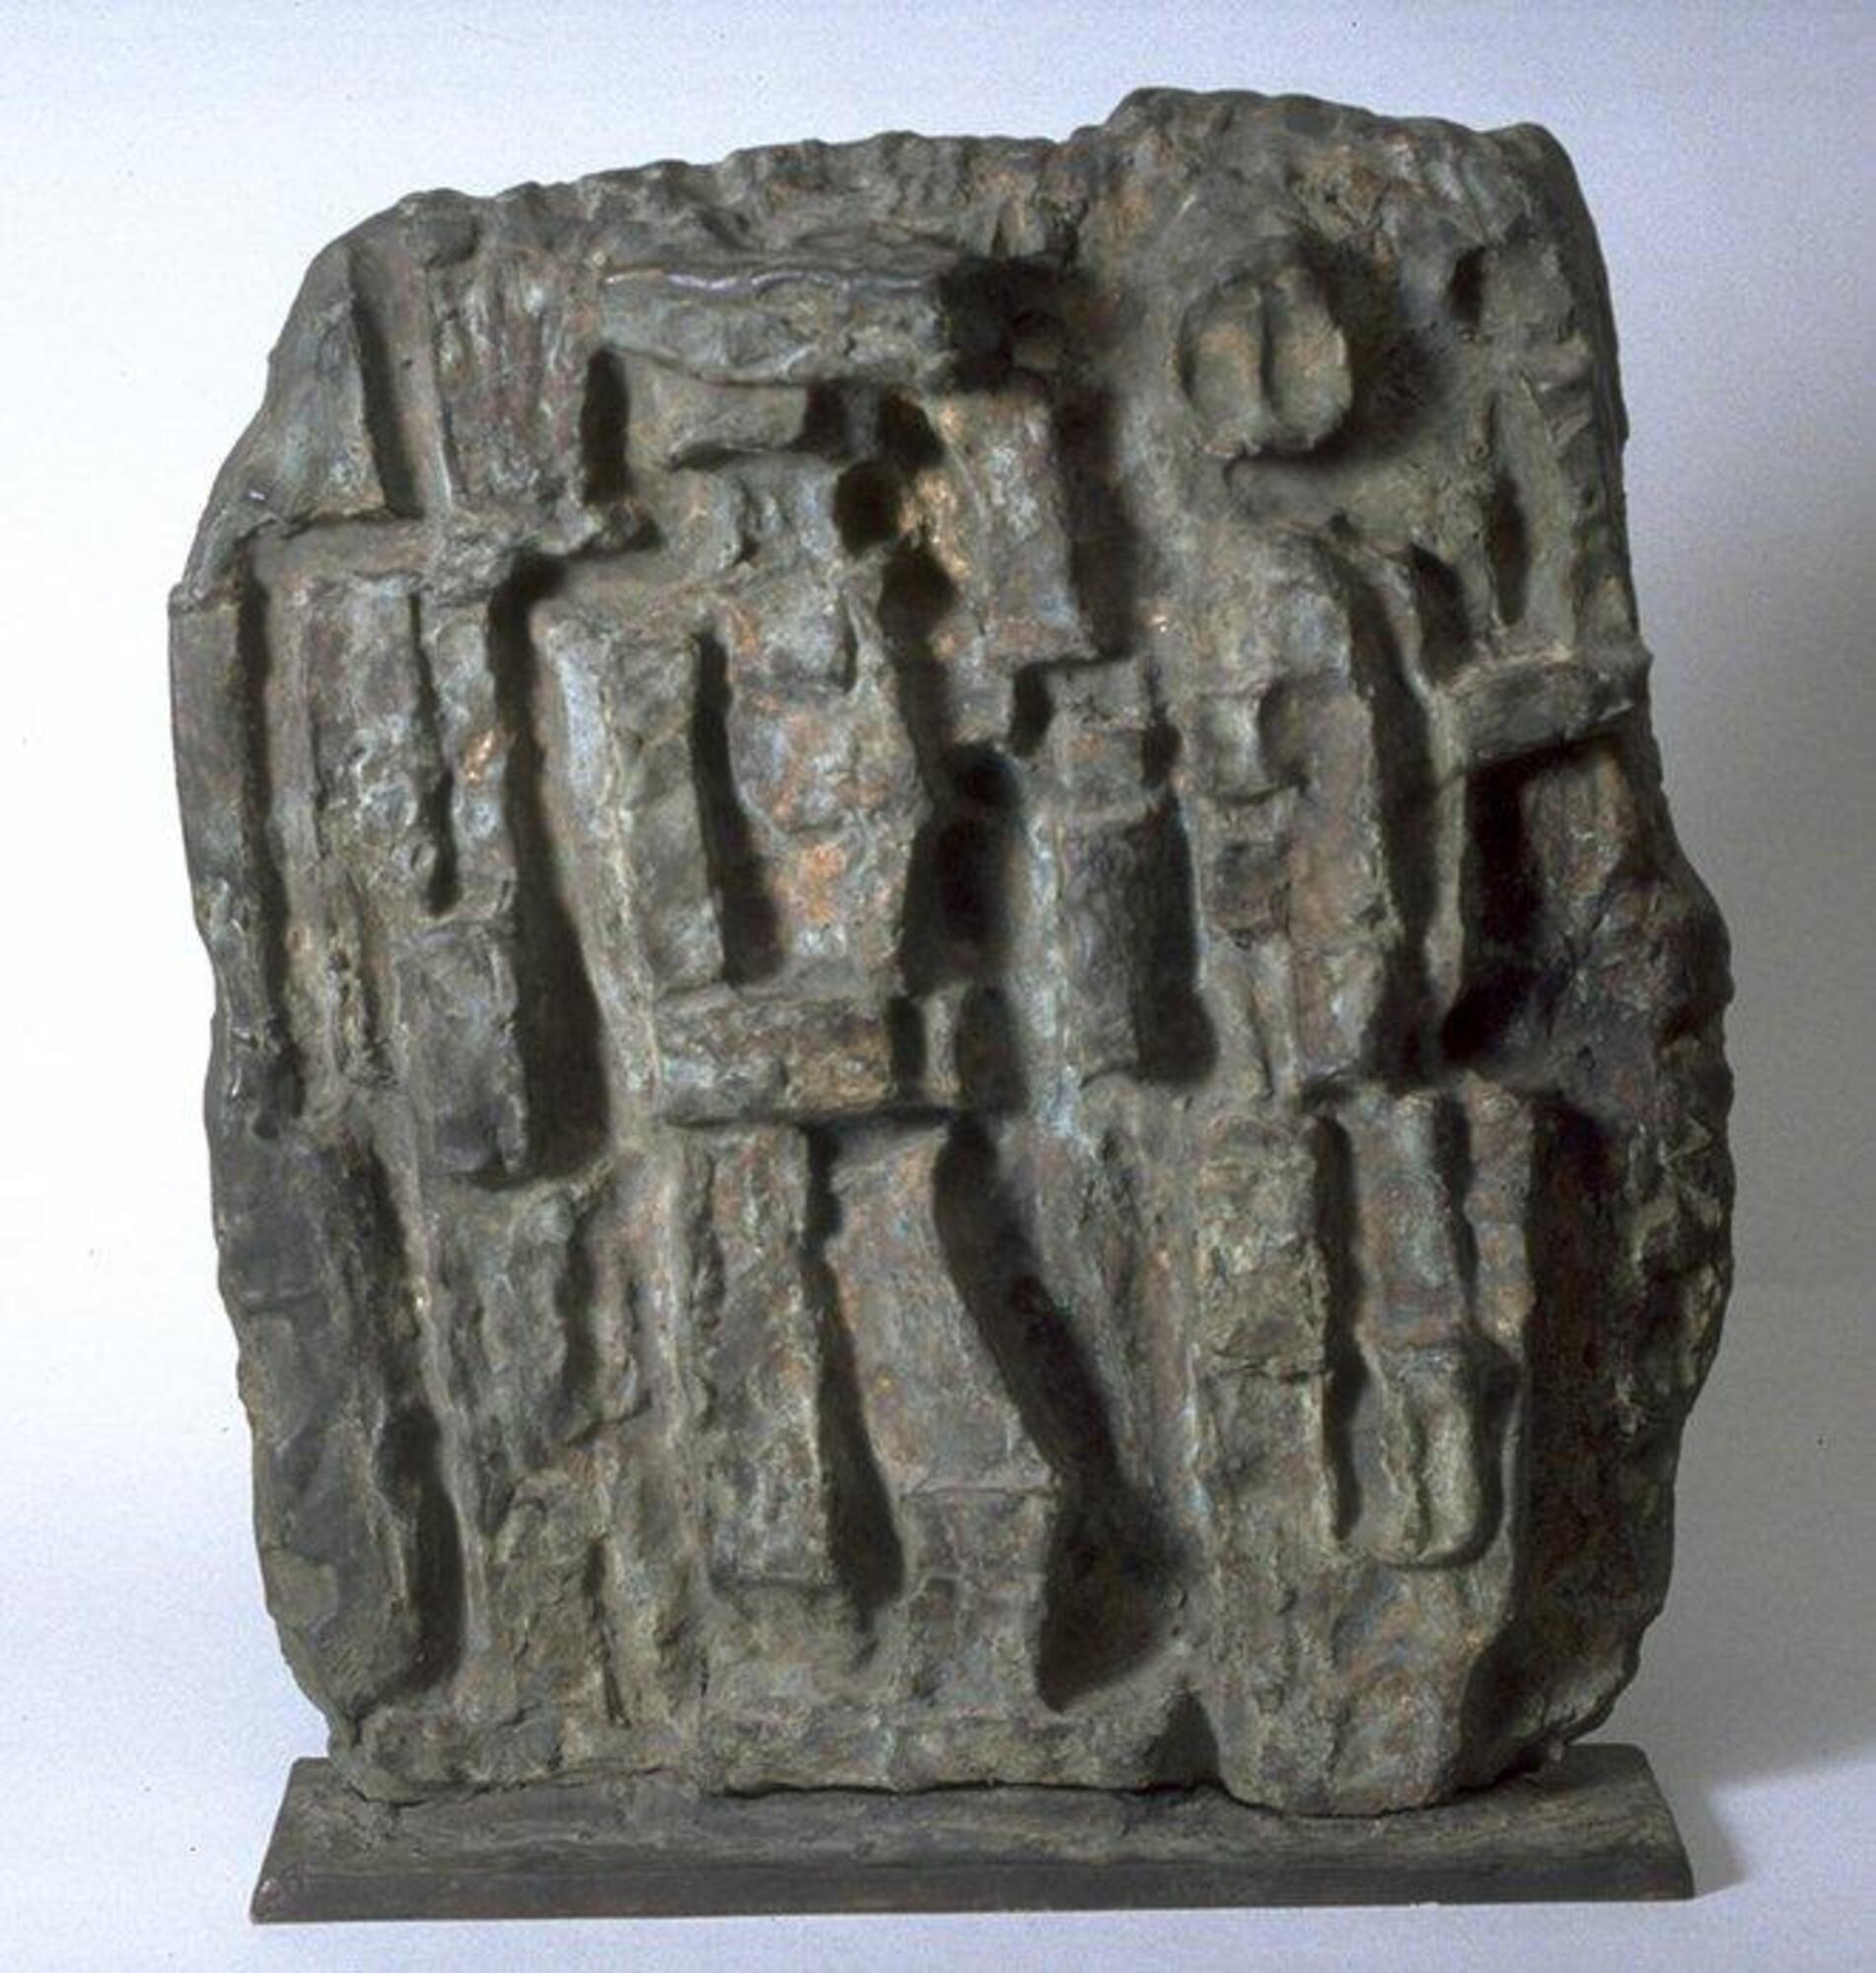 This relief sculpture shows three abstract human figures comprised of rectangular shapes set on a vertically orientated block. The figures and the background are textured and rough.